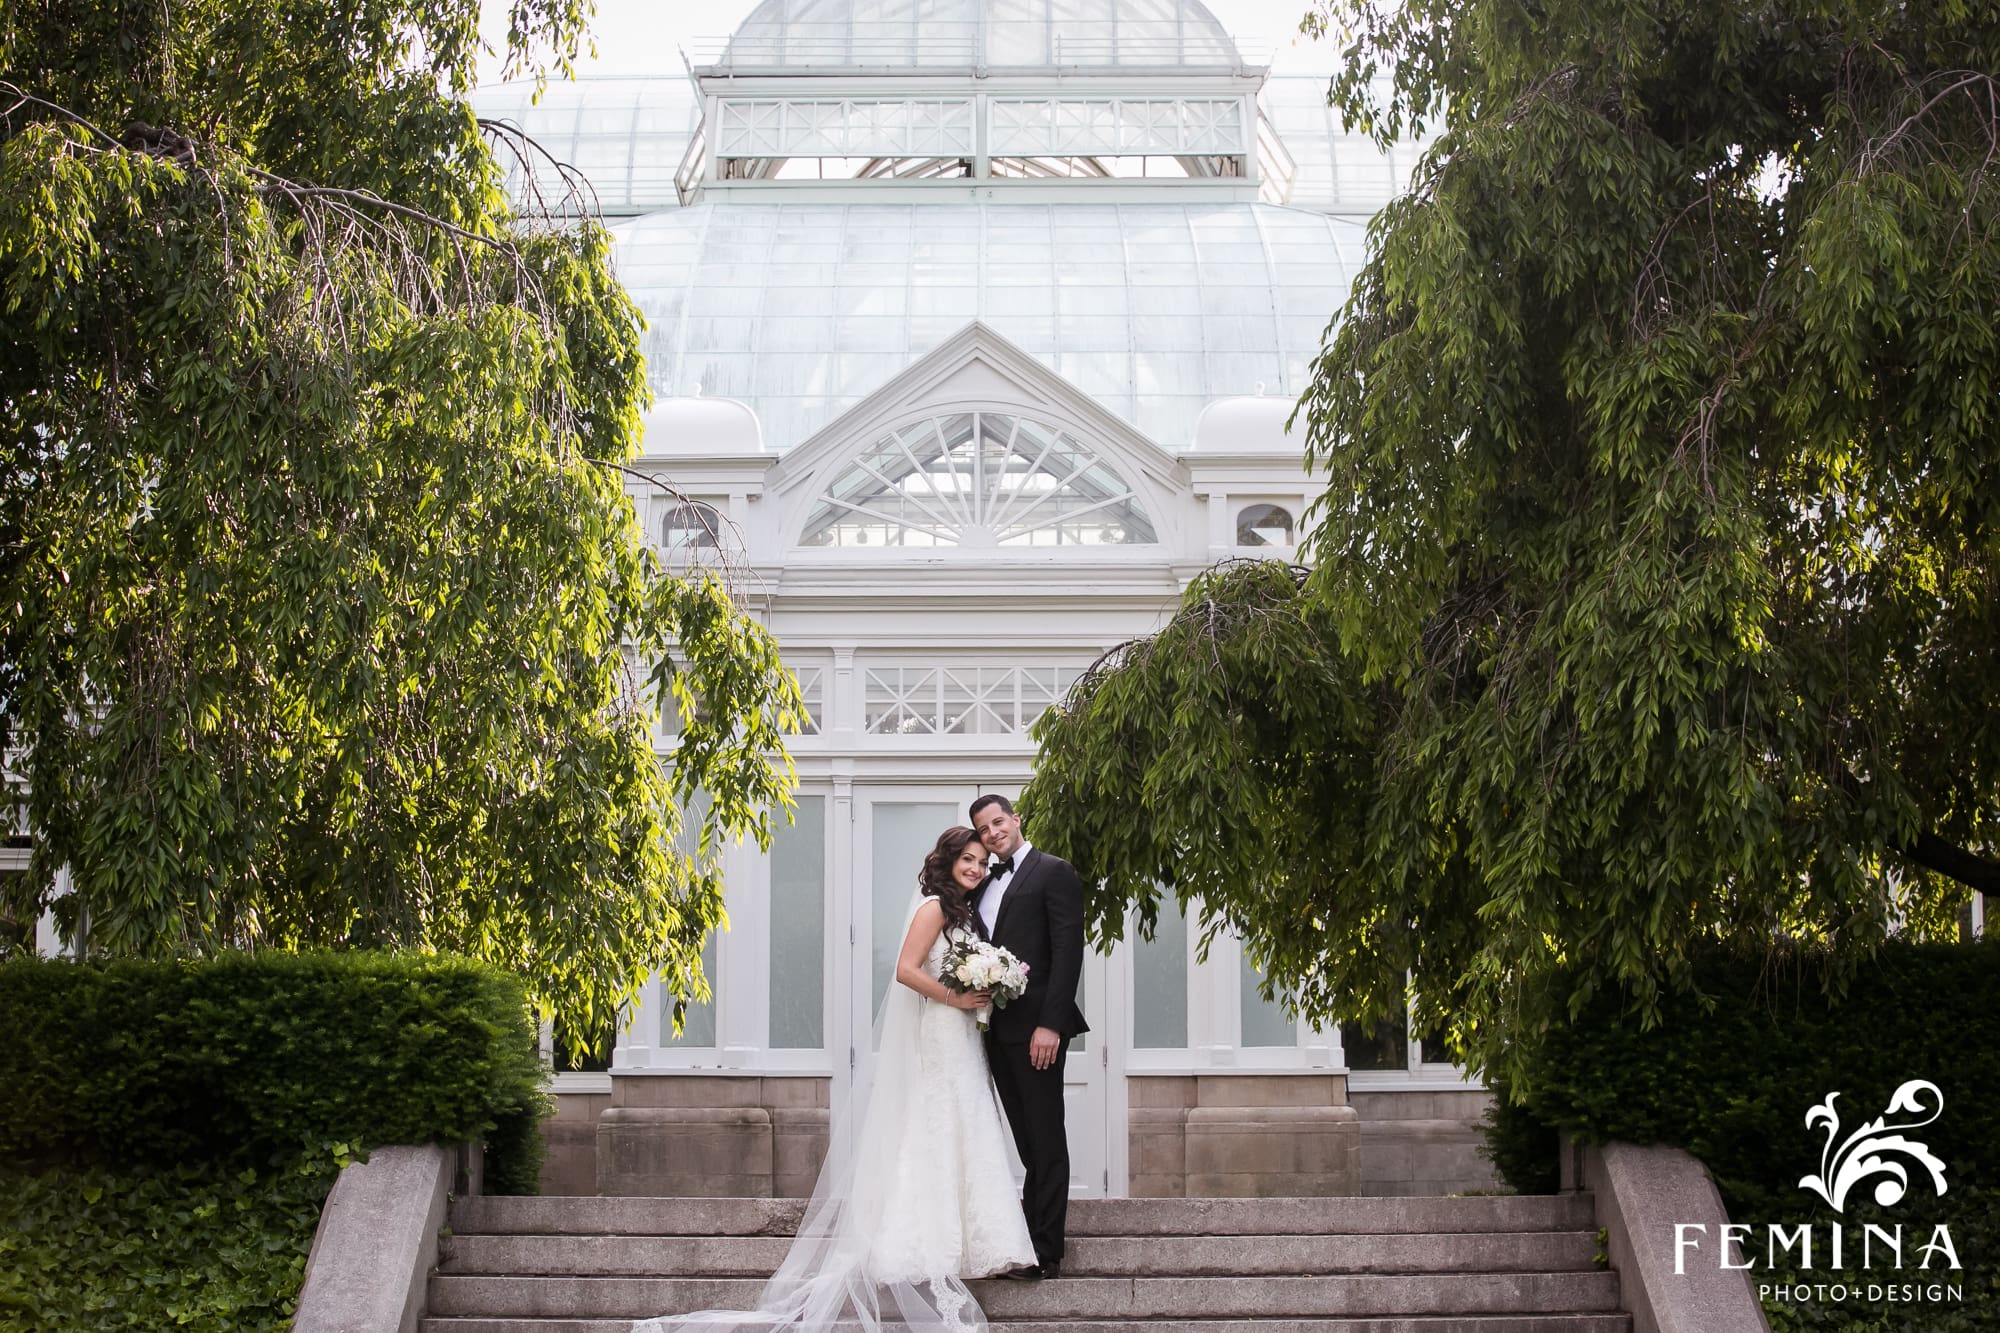 Ryan and Christina pose in front of the stairs of the atrium at NYBG